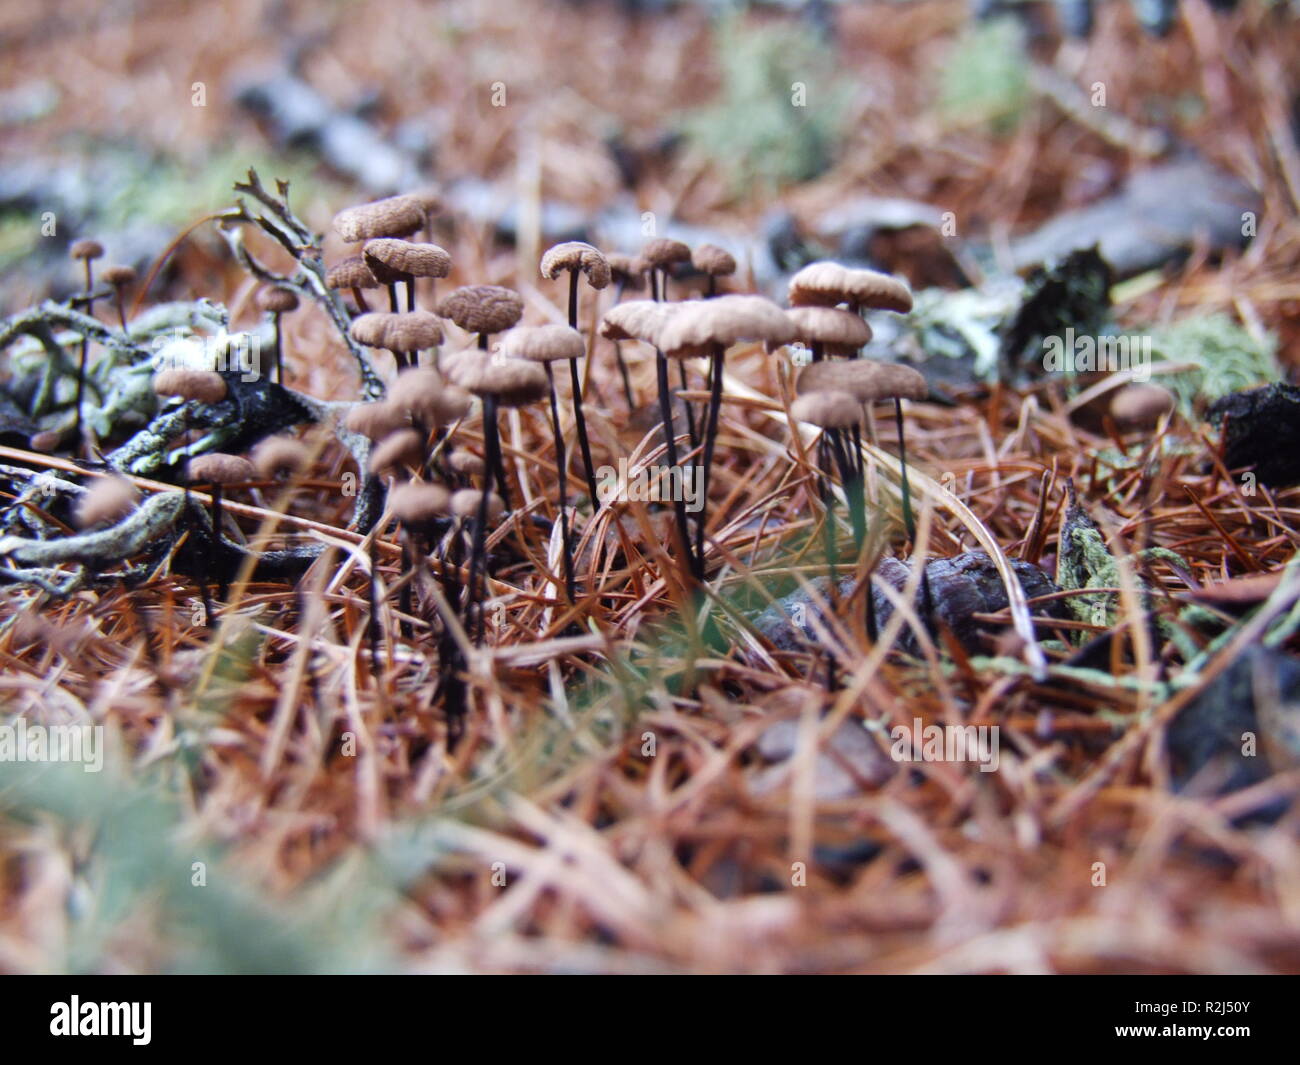 small mushrooms on the forest floor Stock Photo